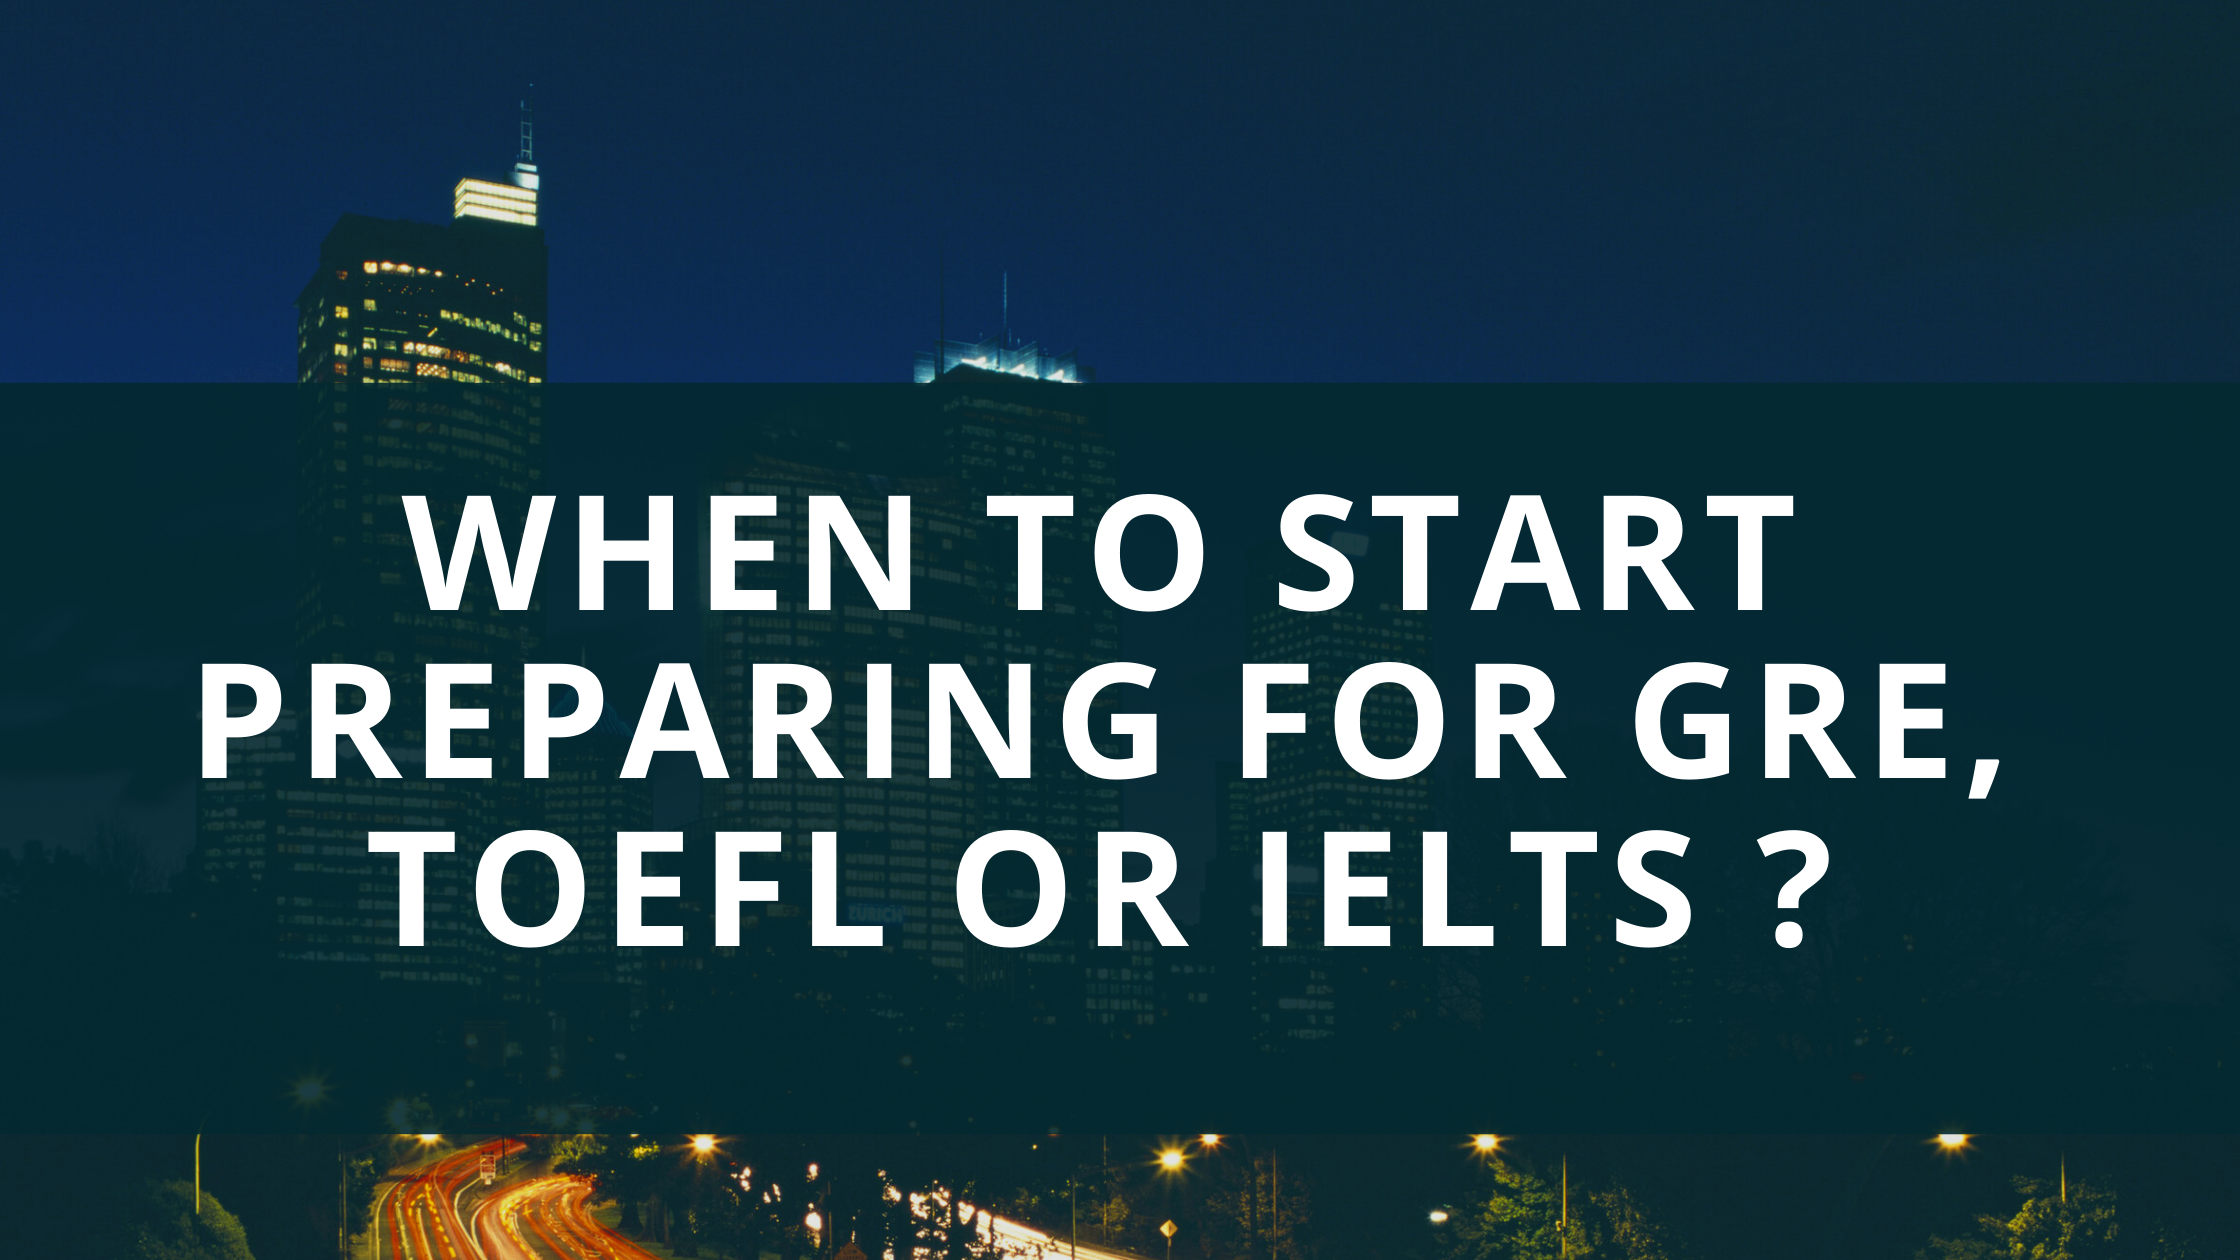 When to start preparing for GRE, TOEFL or IELTS?